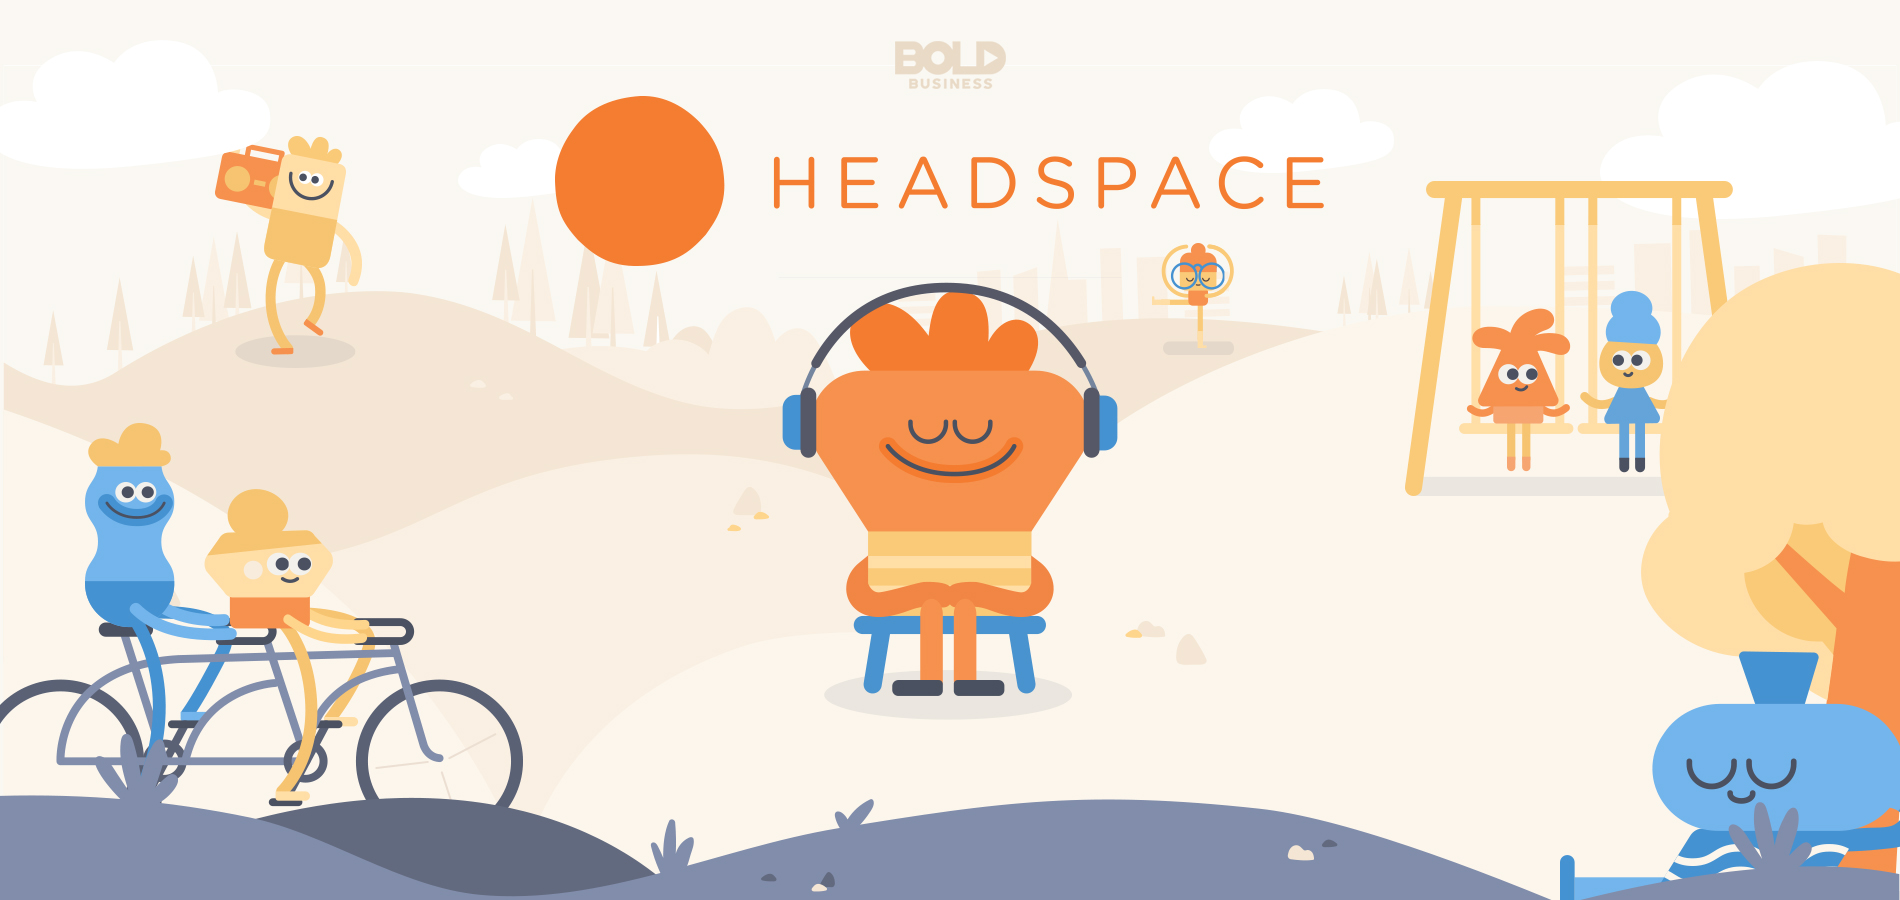 Some examples of illustration from Headspace.